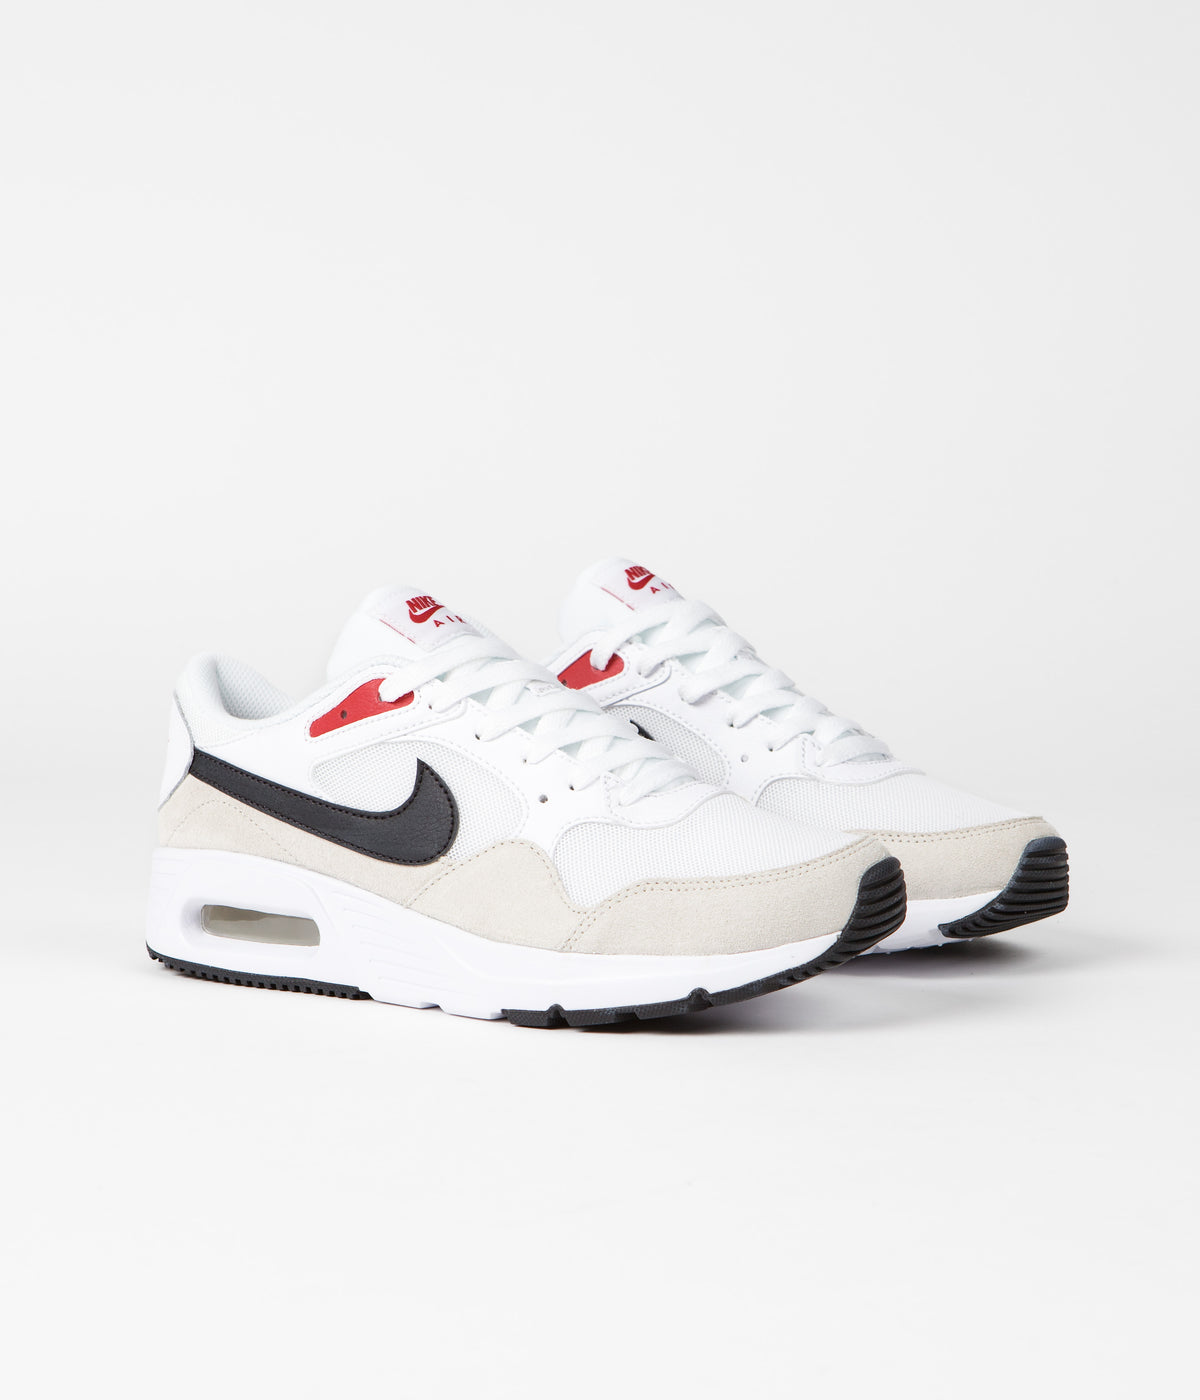 red and white nike air shoes